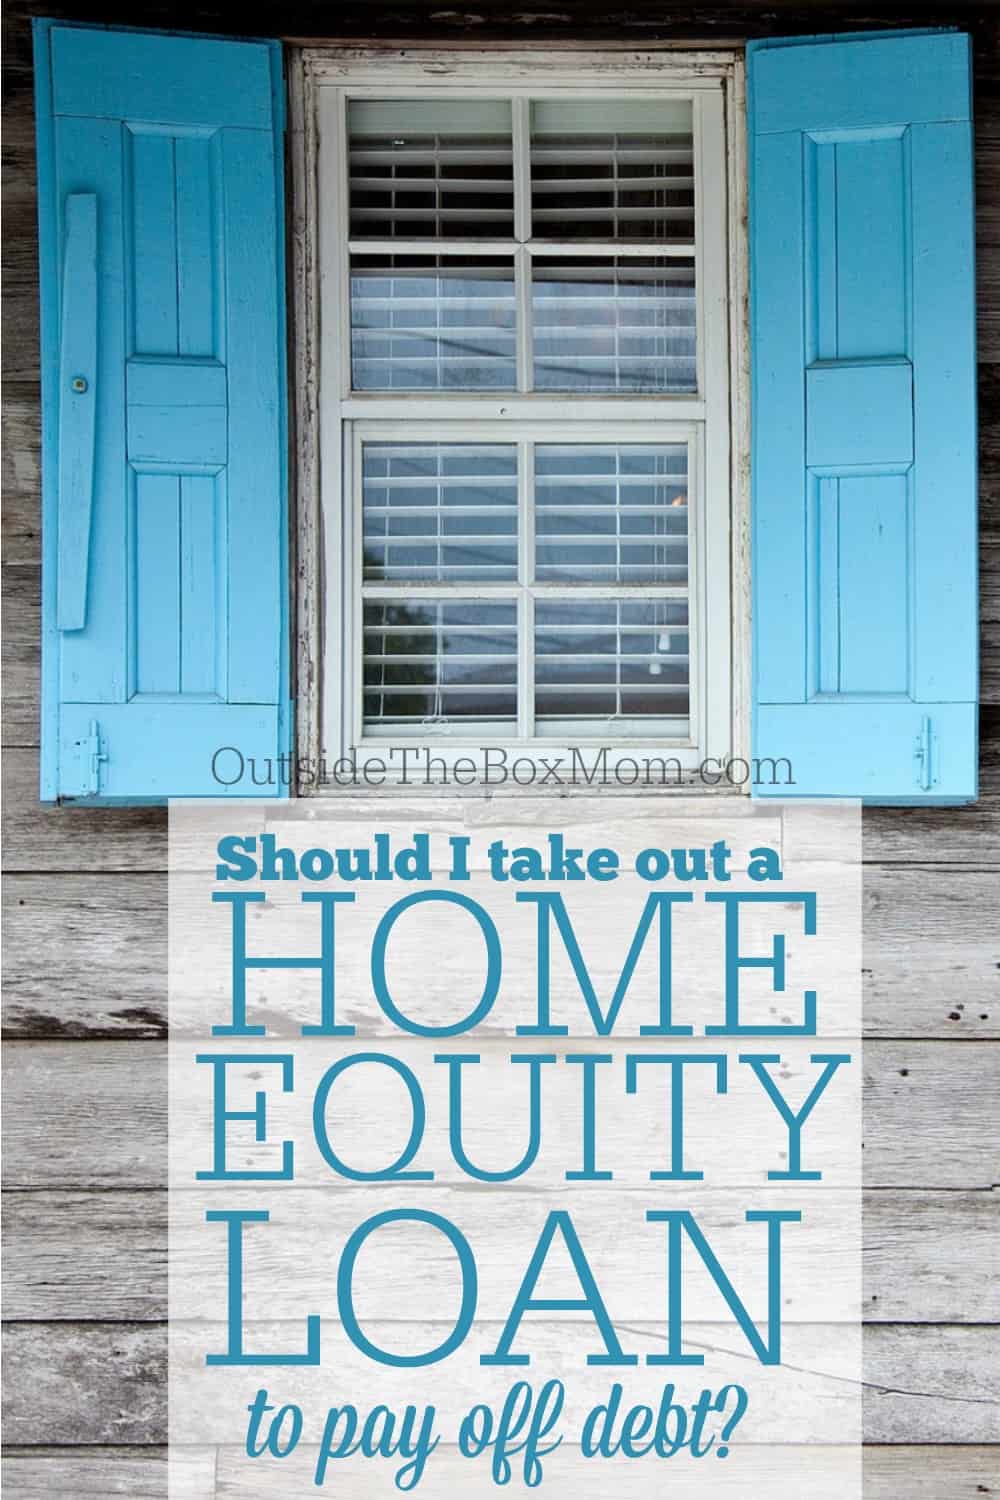 A home equity loan is a type of loan in which the borrower uses the equity of his or her home as collateral. They are typically used for home repairs and improvements, but can sometimes be a last resort to consolidate debt or lower debt payments.